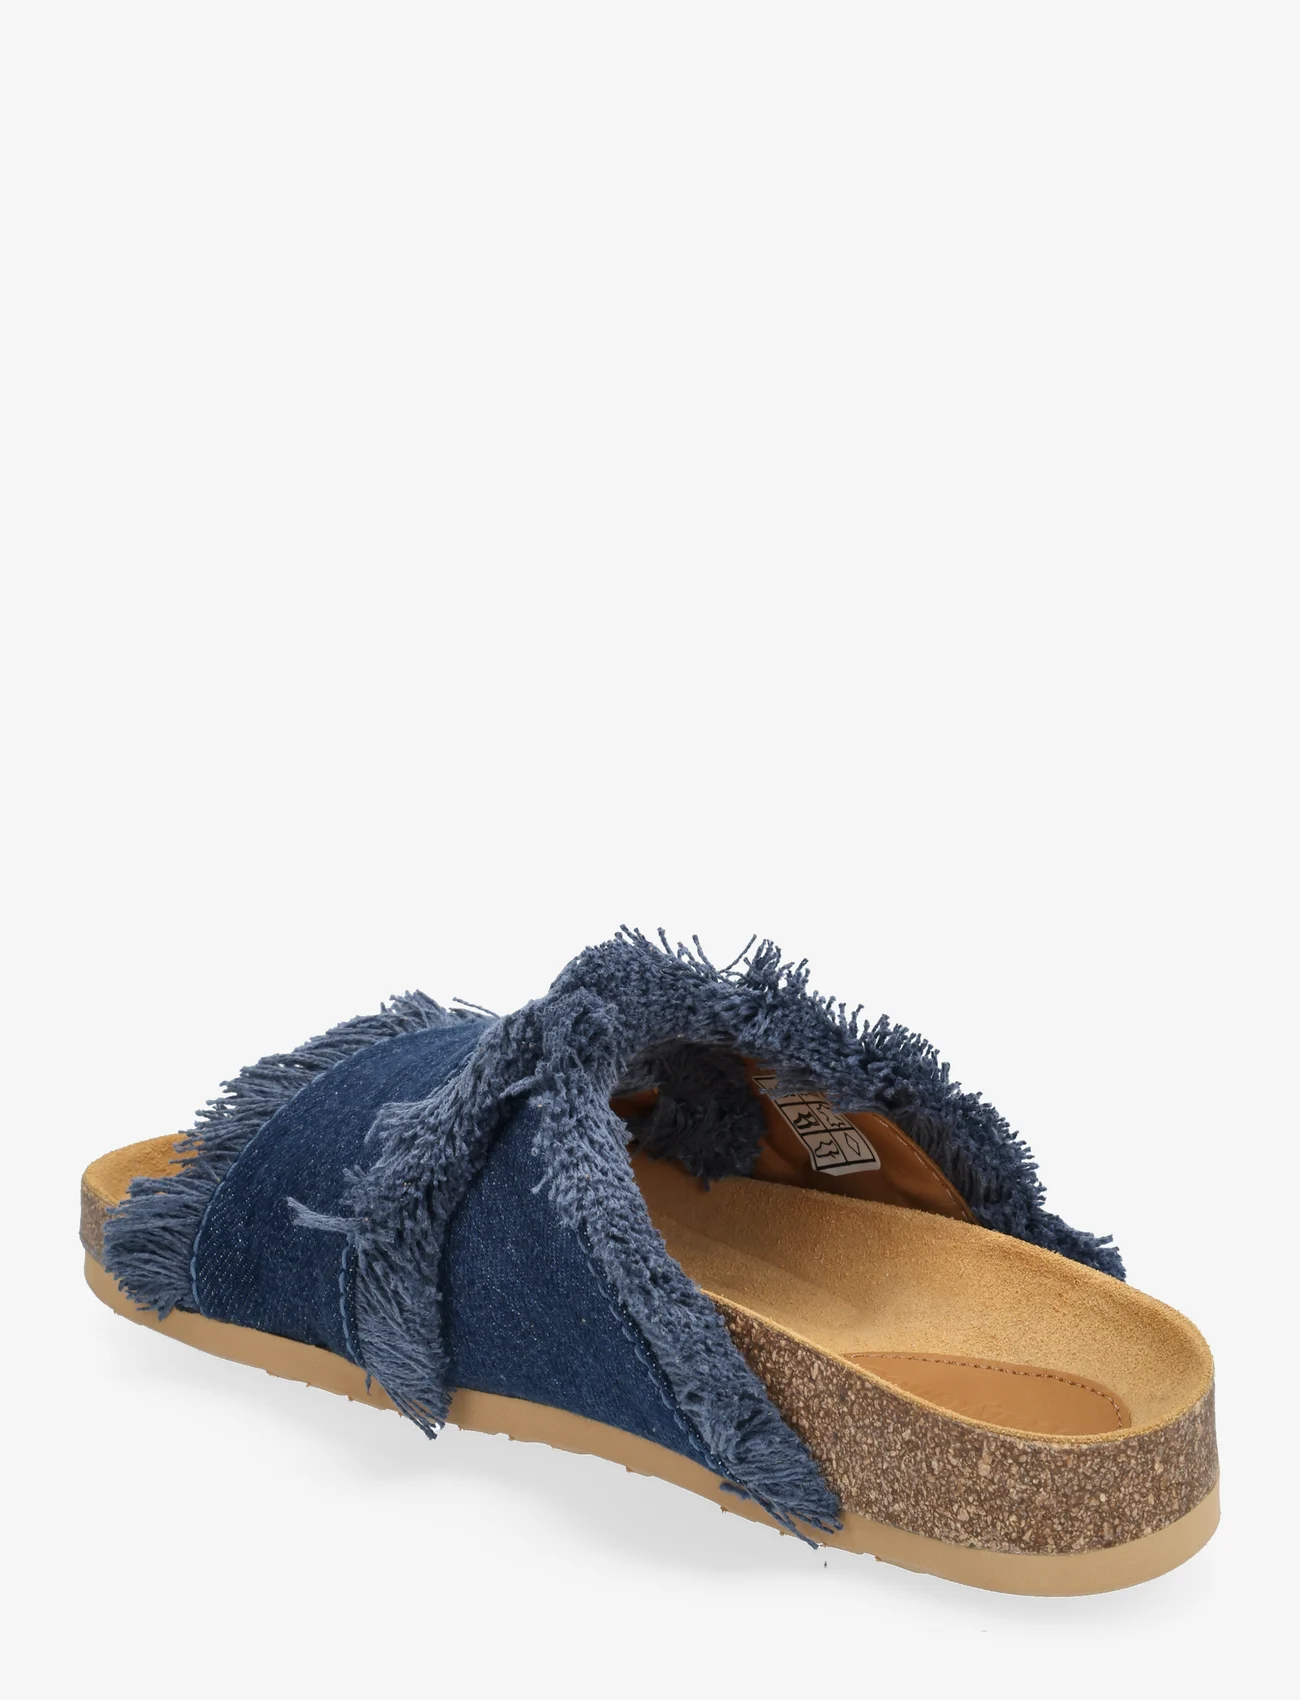 See by Chloé - PRUE - trending shoes - blue - 2